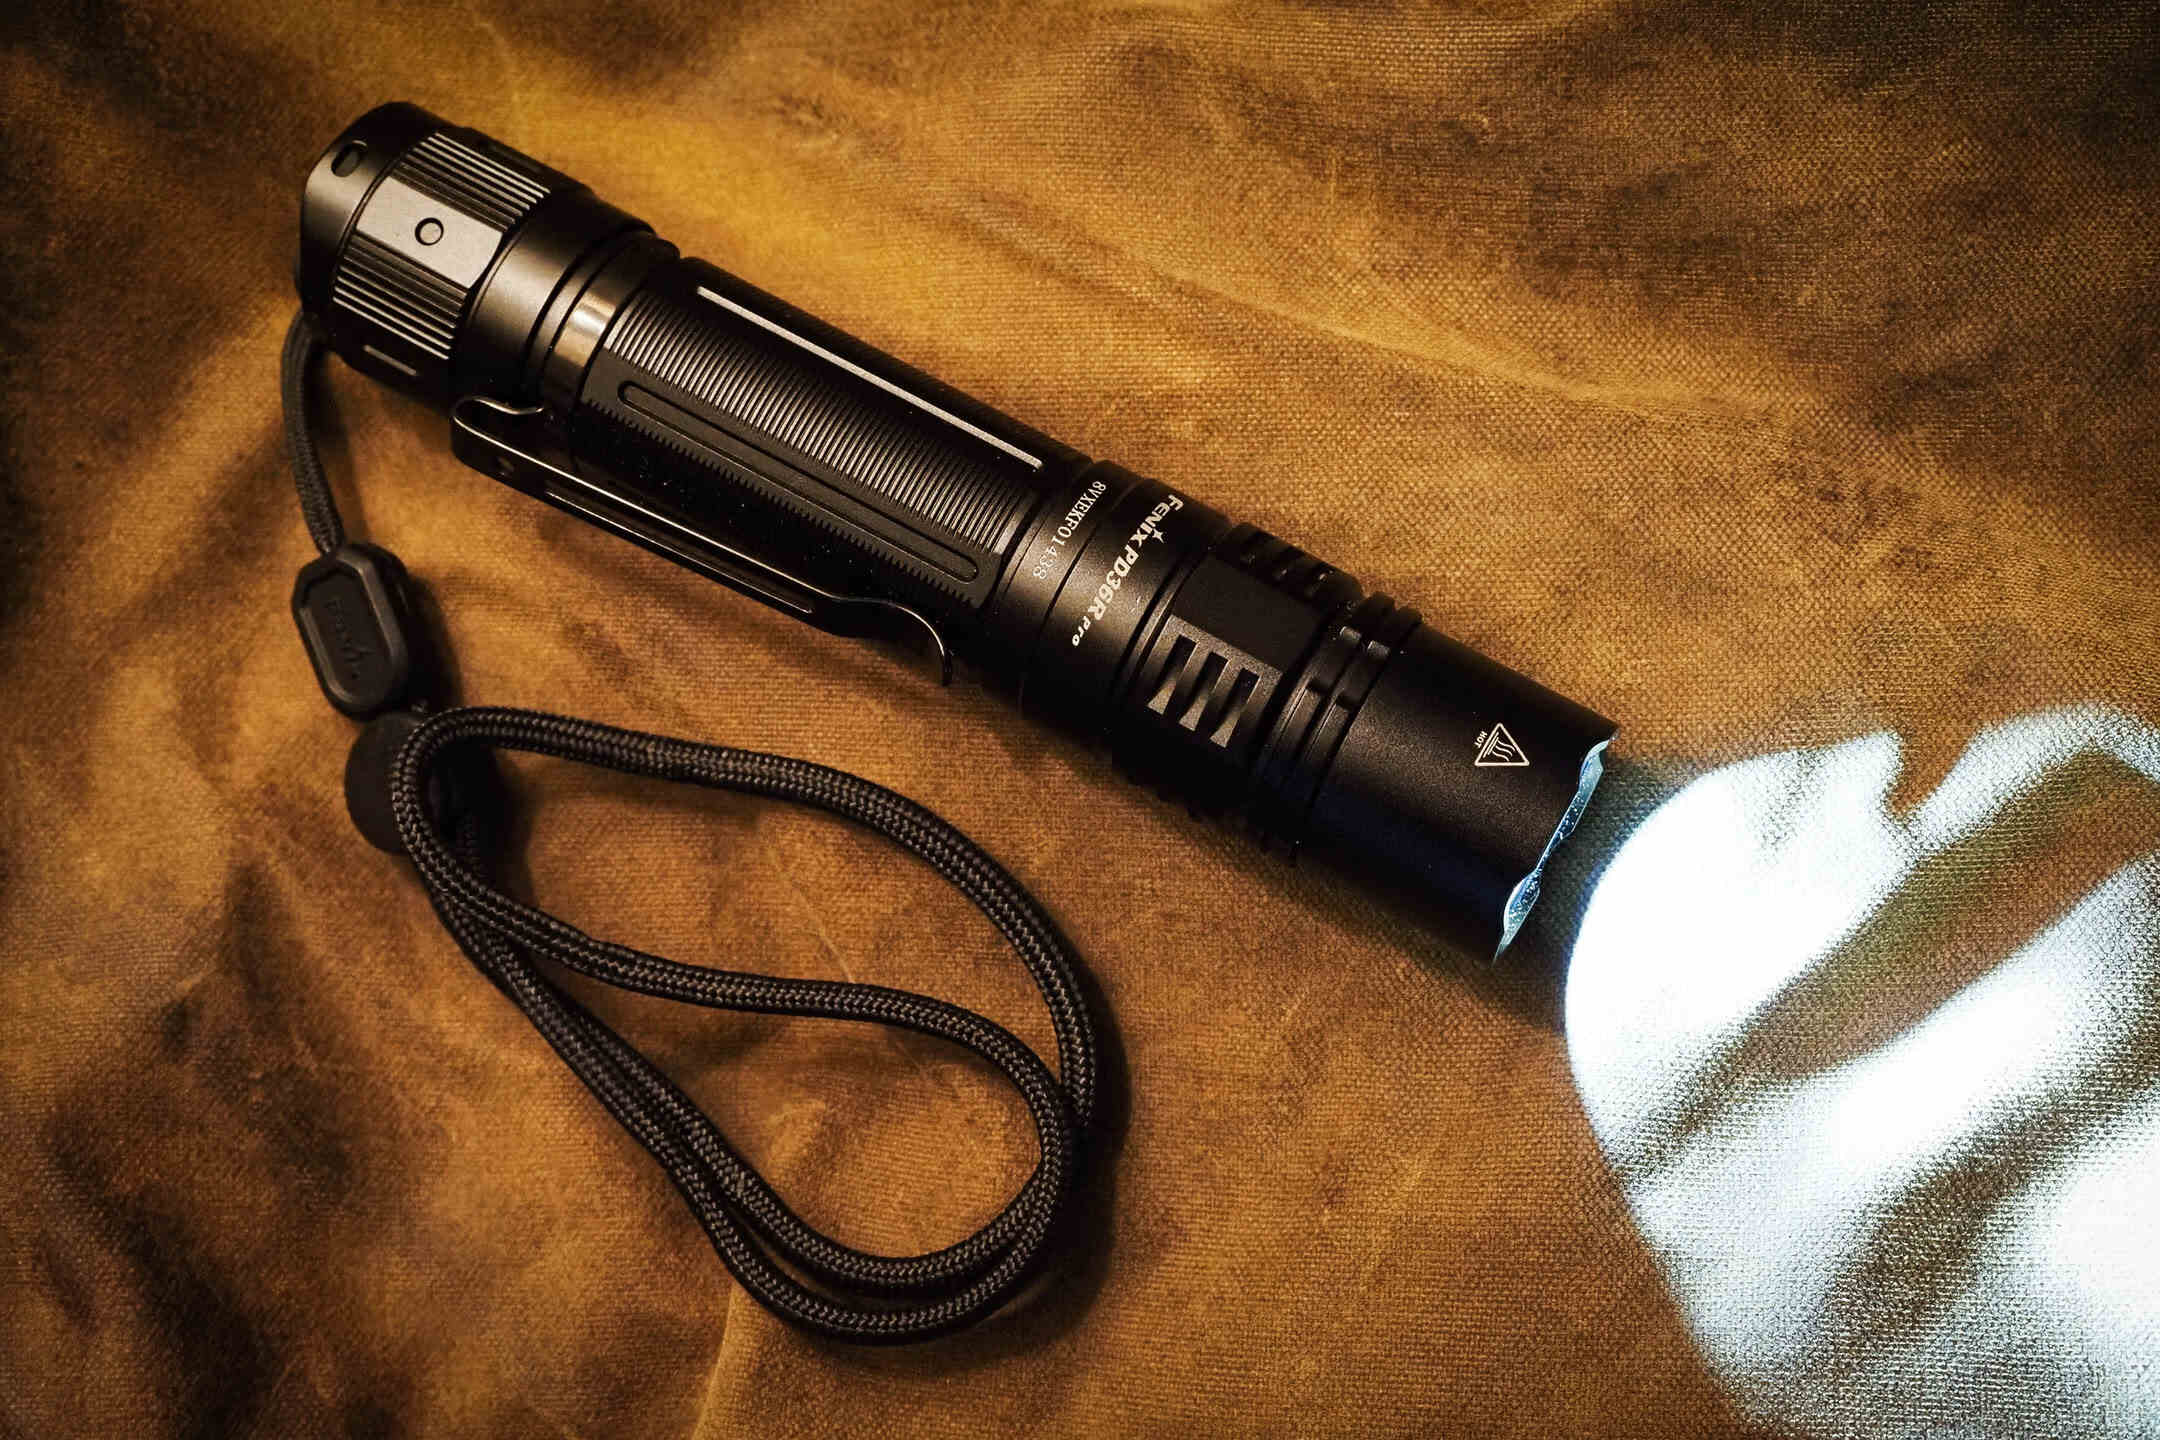 Top 5 Flashlights for Him: A Comprehensive Review